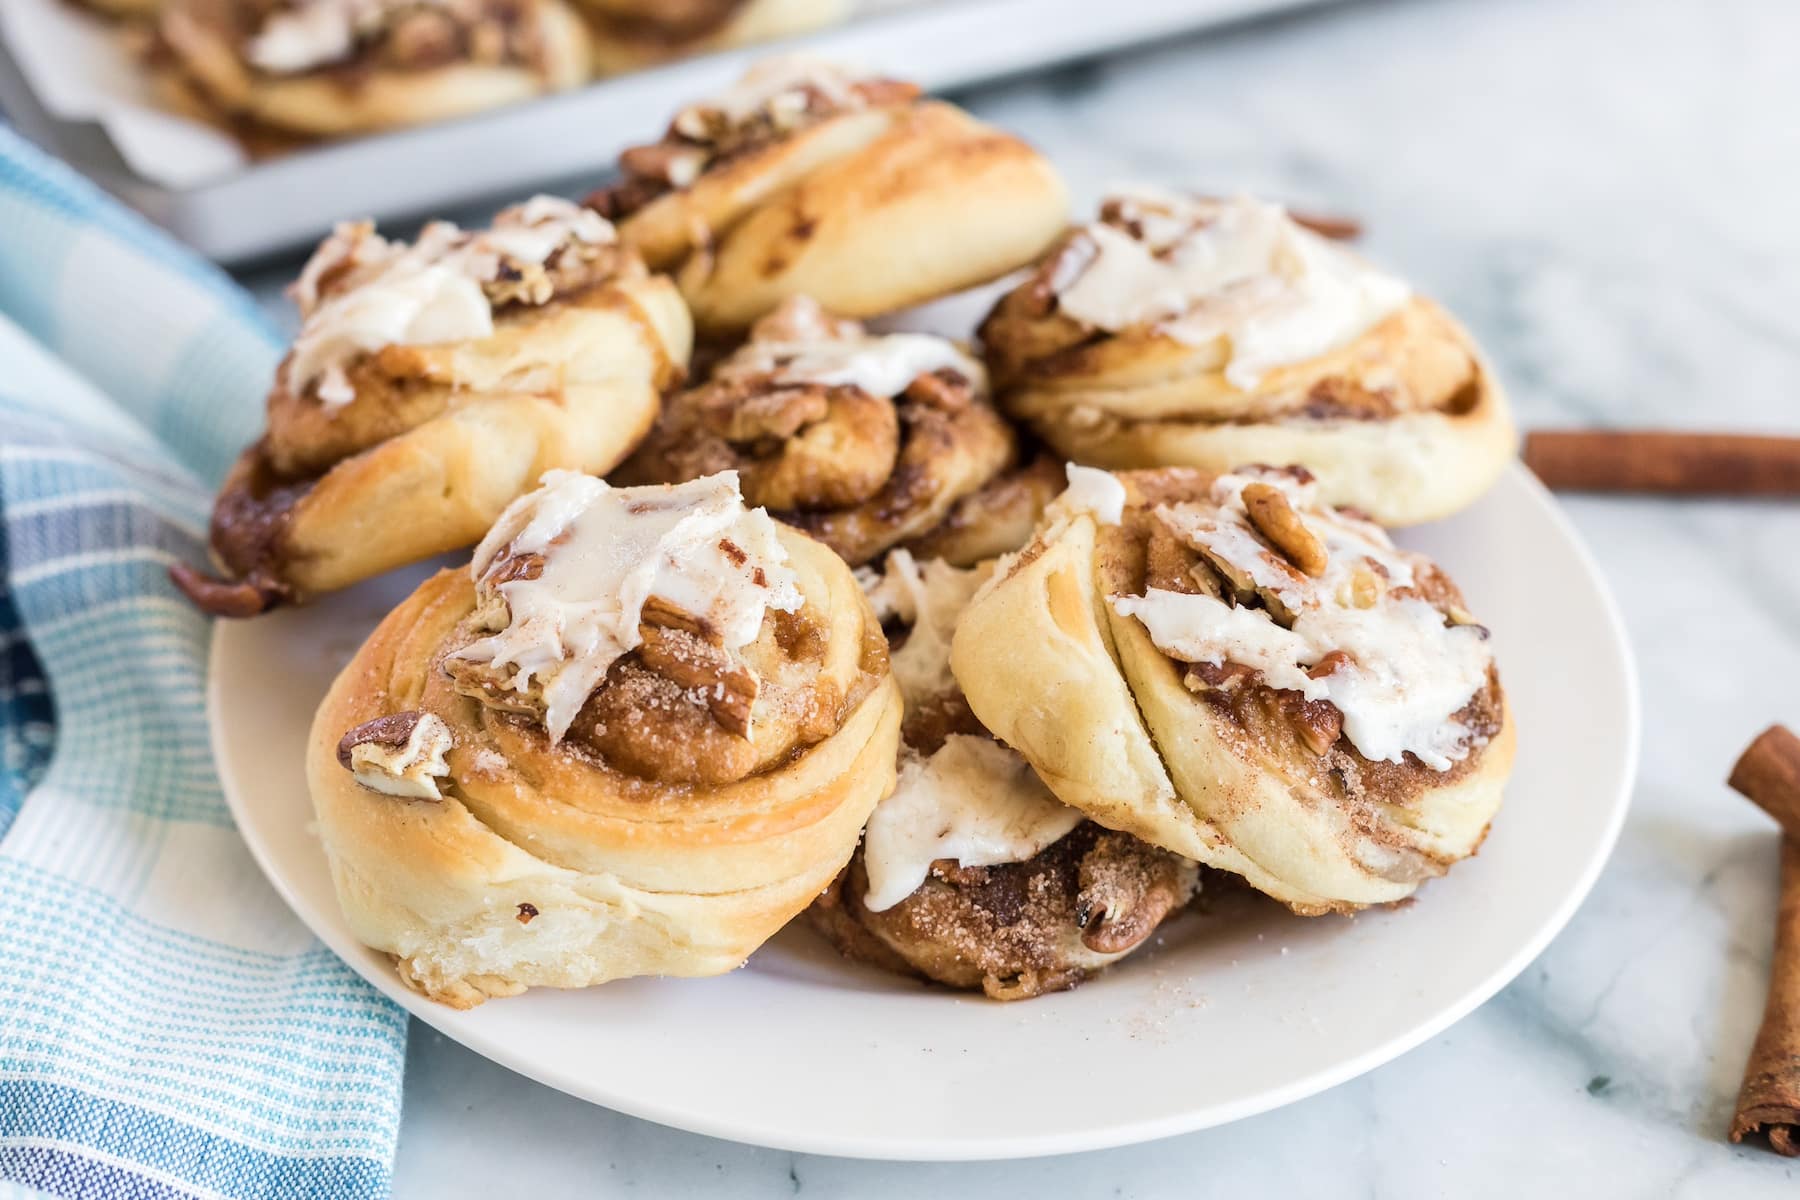 a plate full of mini cinnamon rolls topped with cinnamon-sugar, chopped pecans, and homemade icing